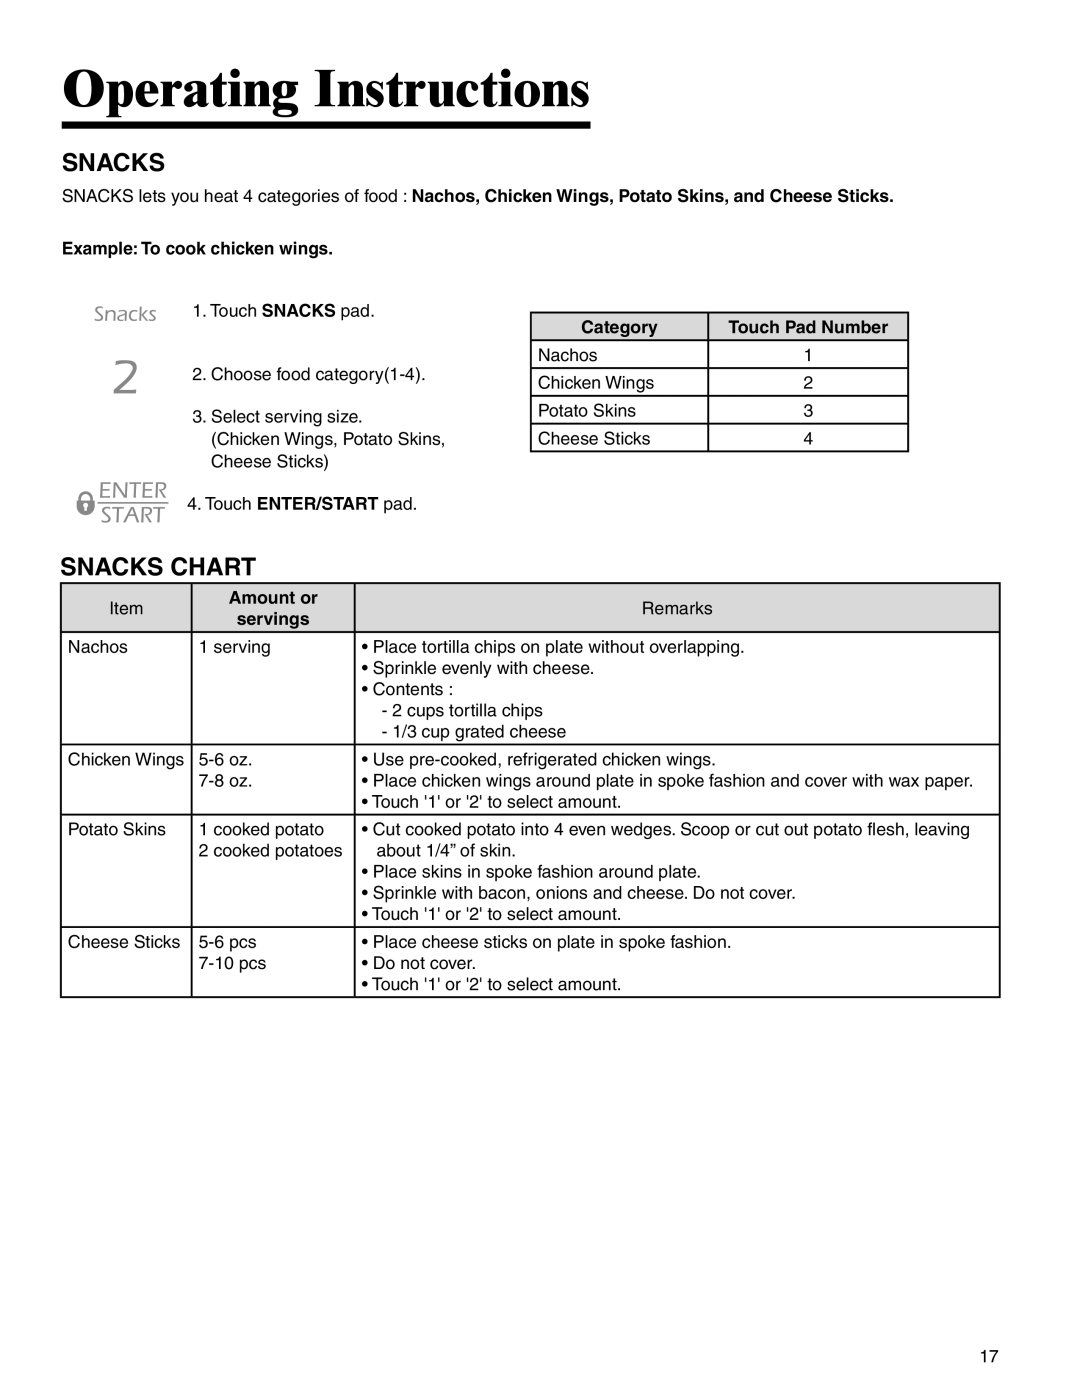 Maytag UMC5200BCB/W/S Snacks Chart, Operating Instructions, Example: To cook chicken wings, Category, Touch Pad Number 